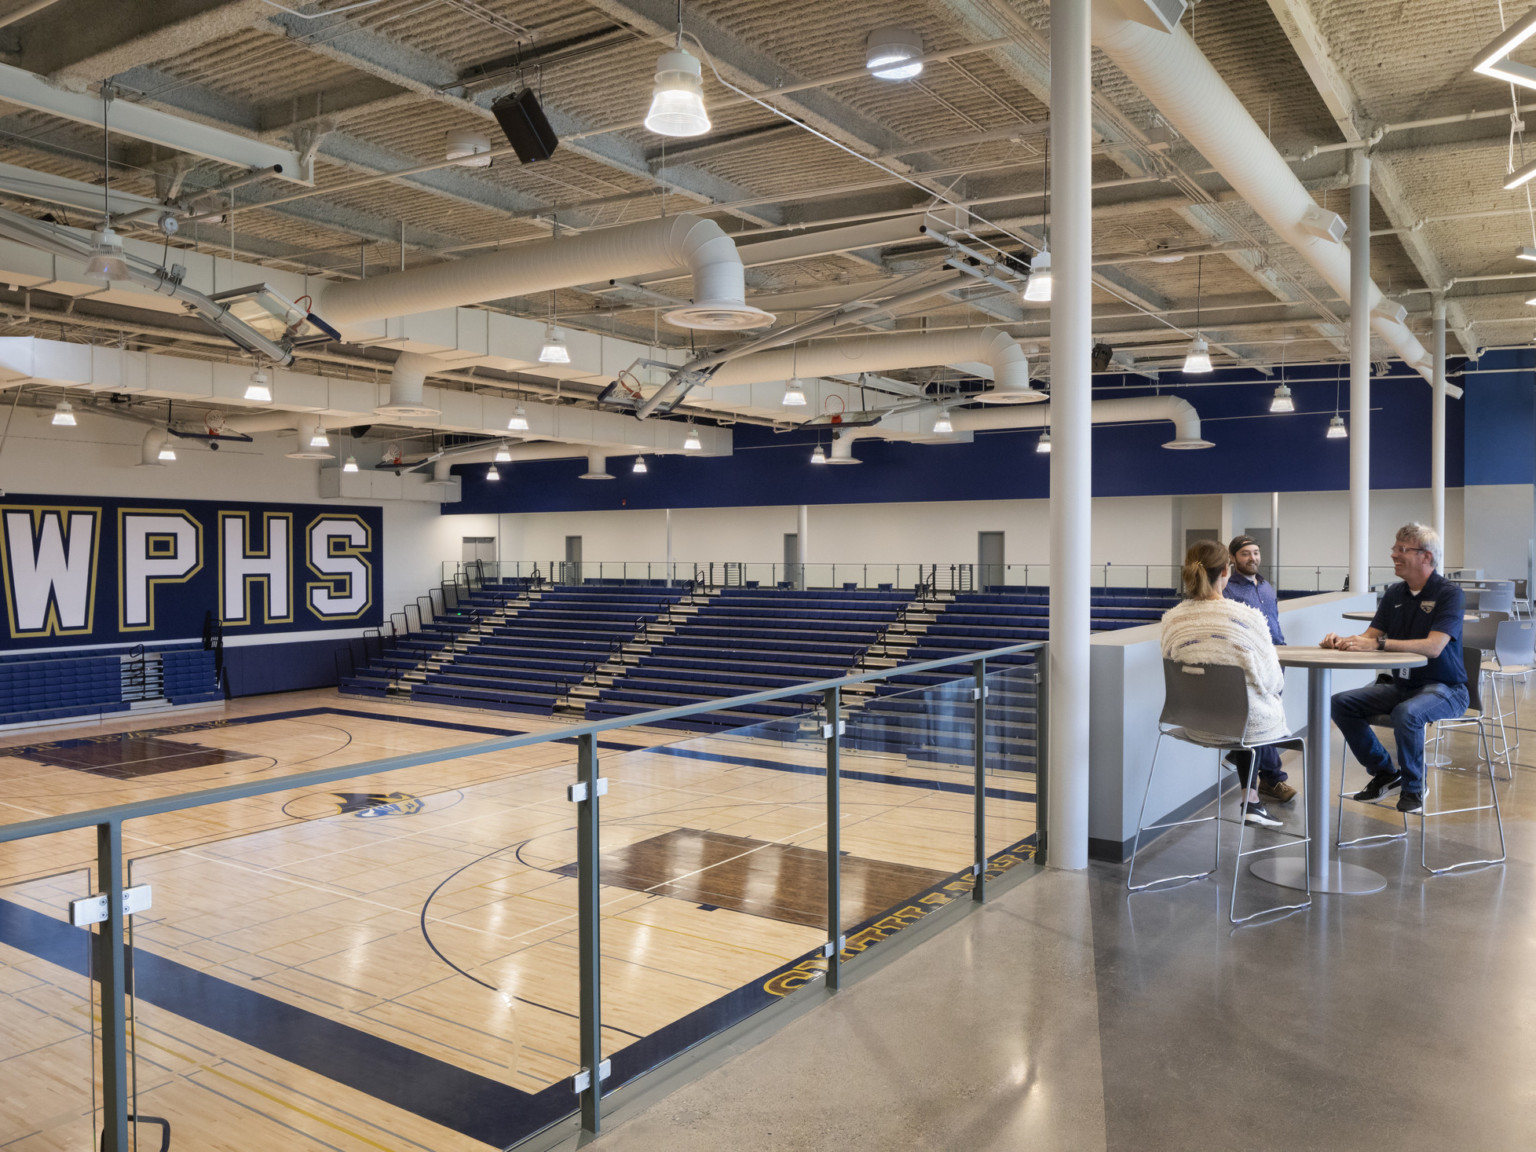 High top tables and chairs on 2nd floor balcony over double height basketball court with wood flooring and blue bleachers